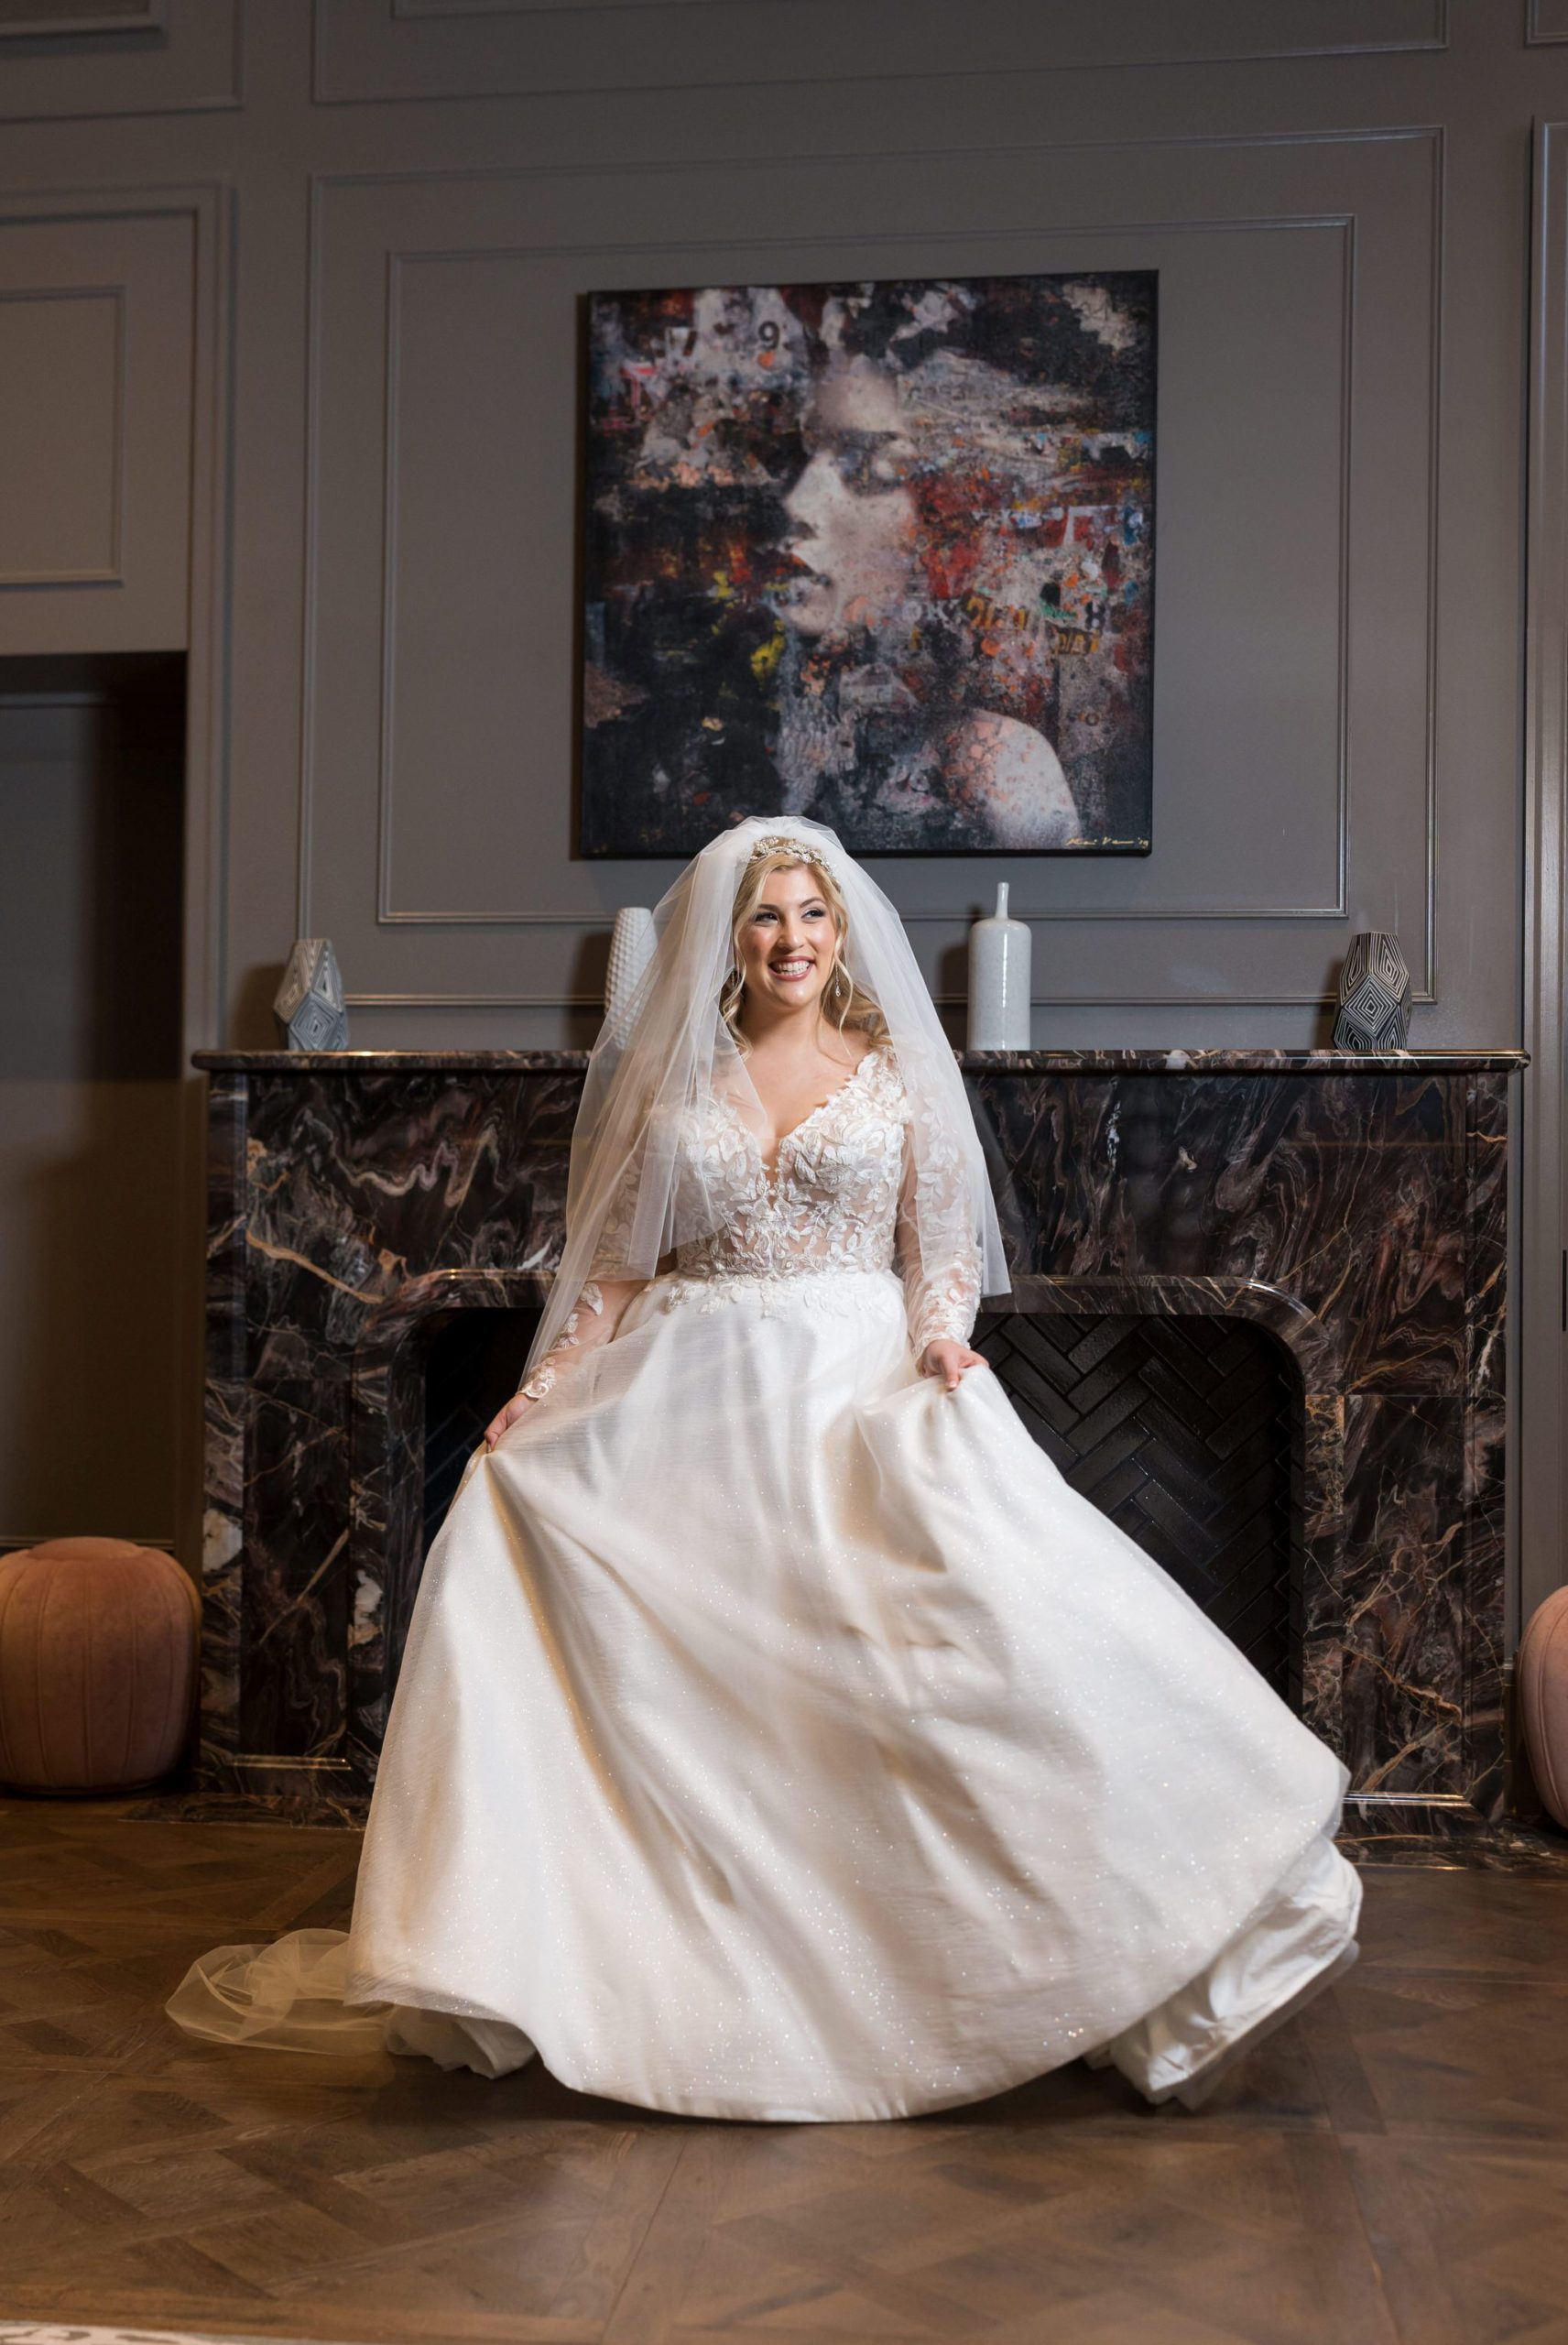 A bride poses on her wedding day at the Daxton Hotel in Birmingham, MI.  